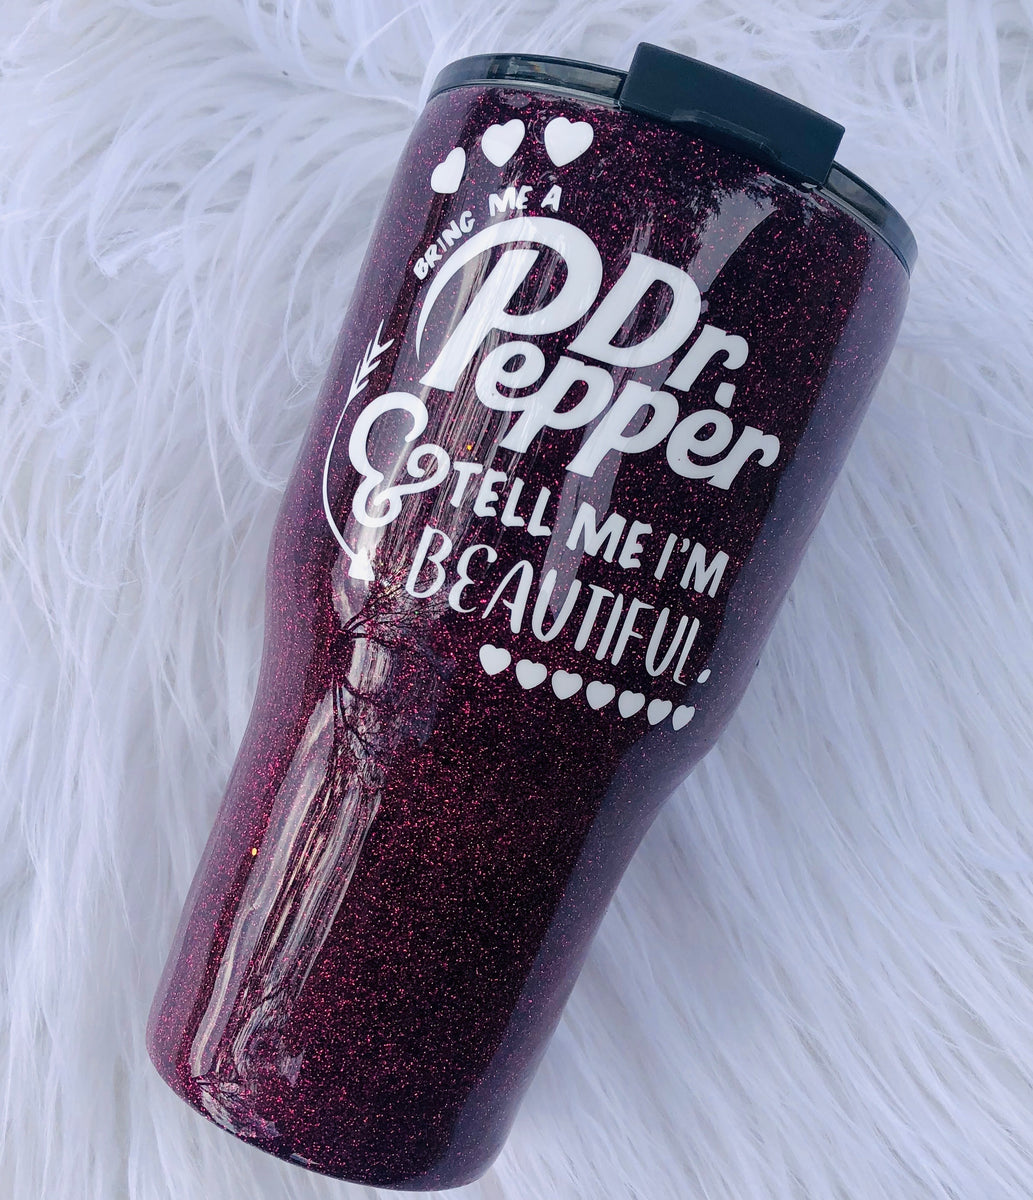 Bring Me a Dr. Pepper and Tell Me I'm Beautiful Tumbler **FREE SHIPPIN